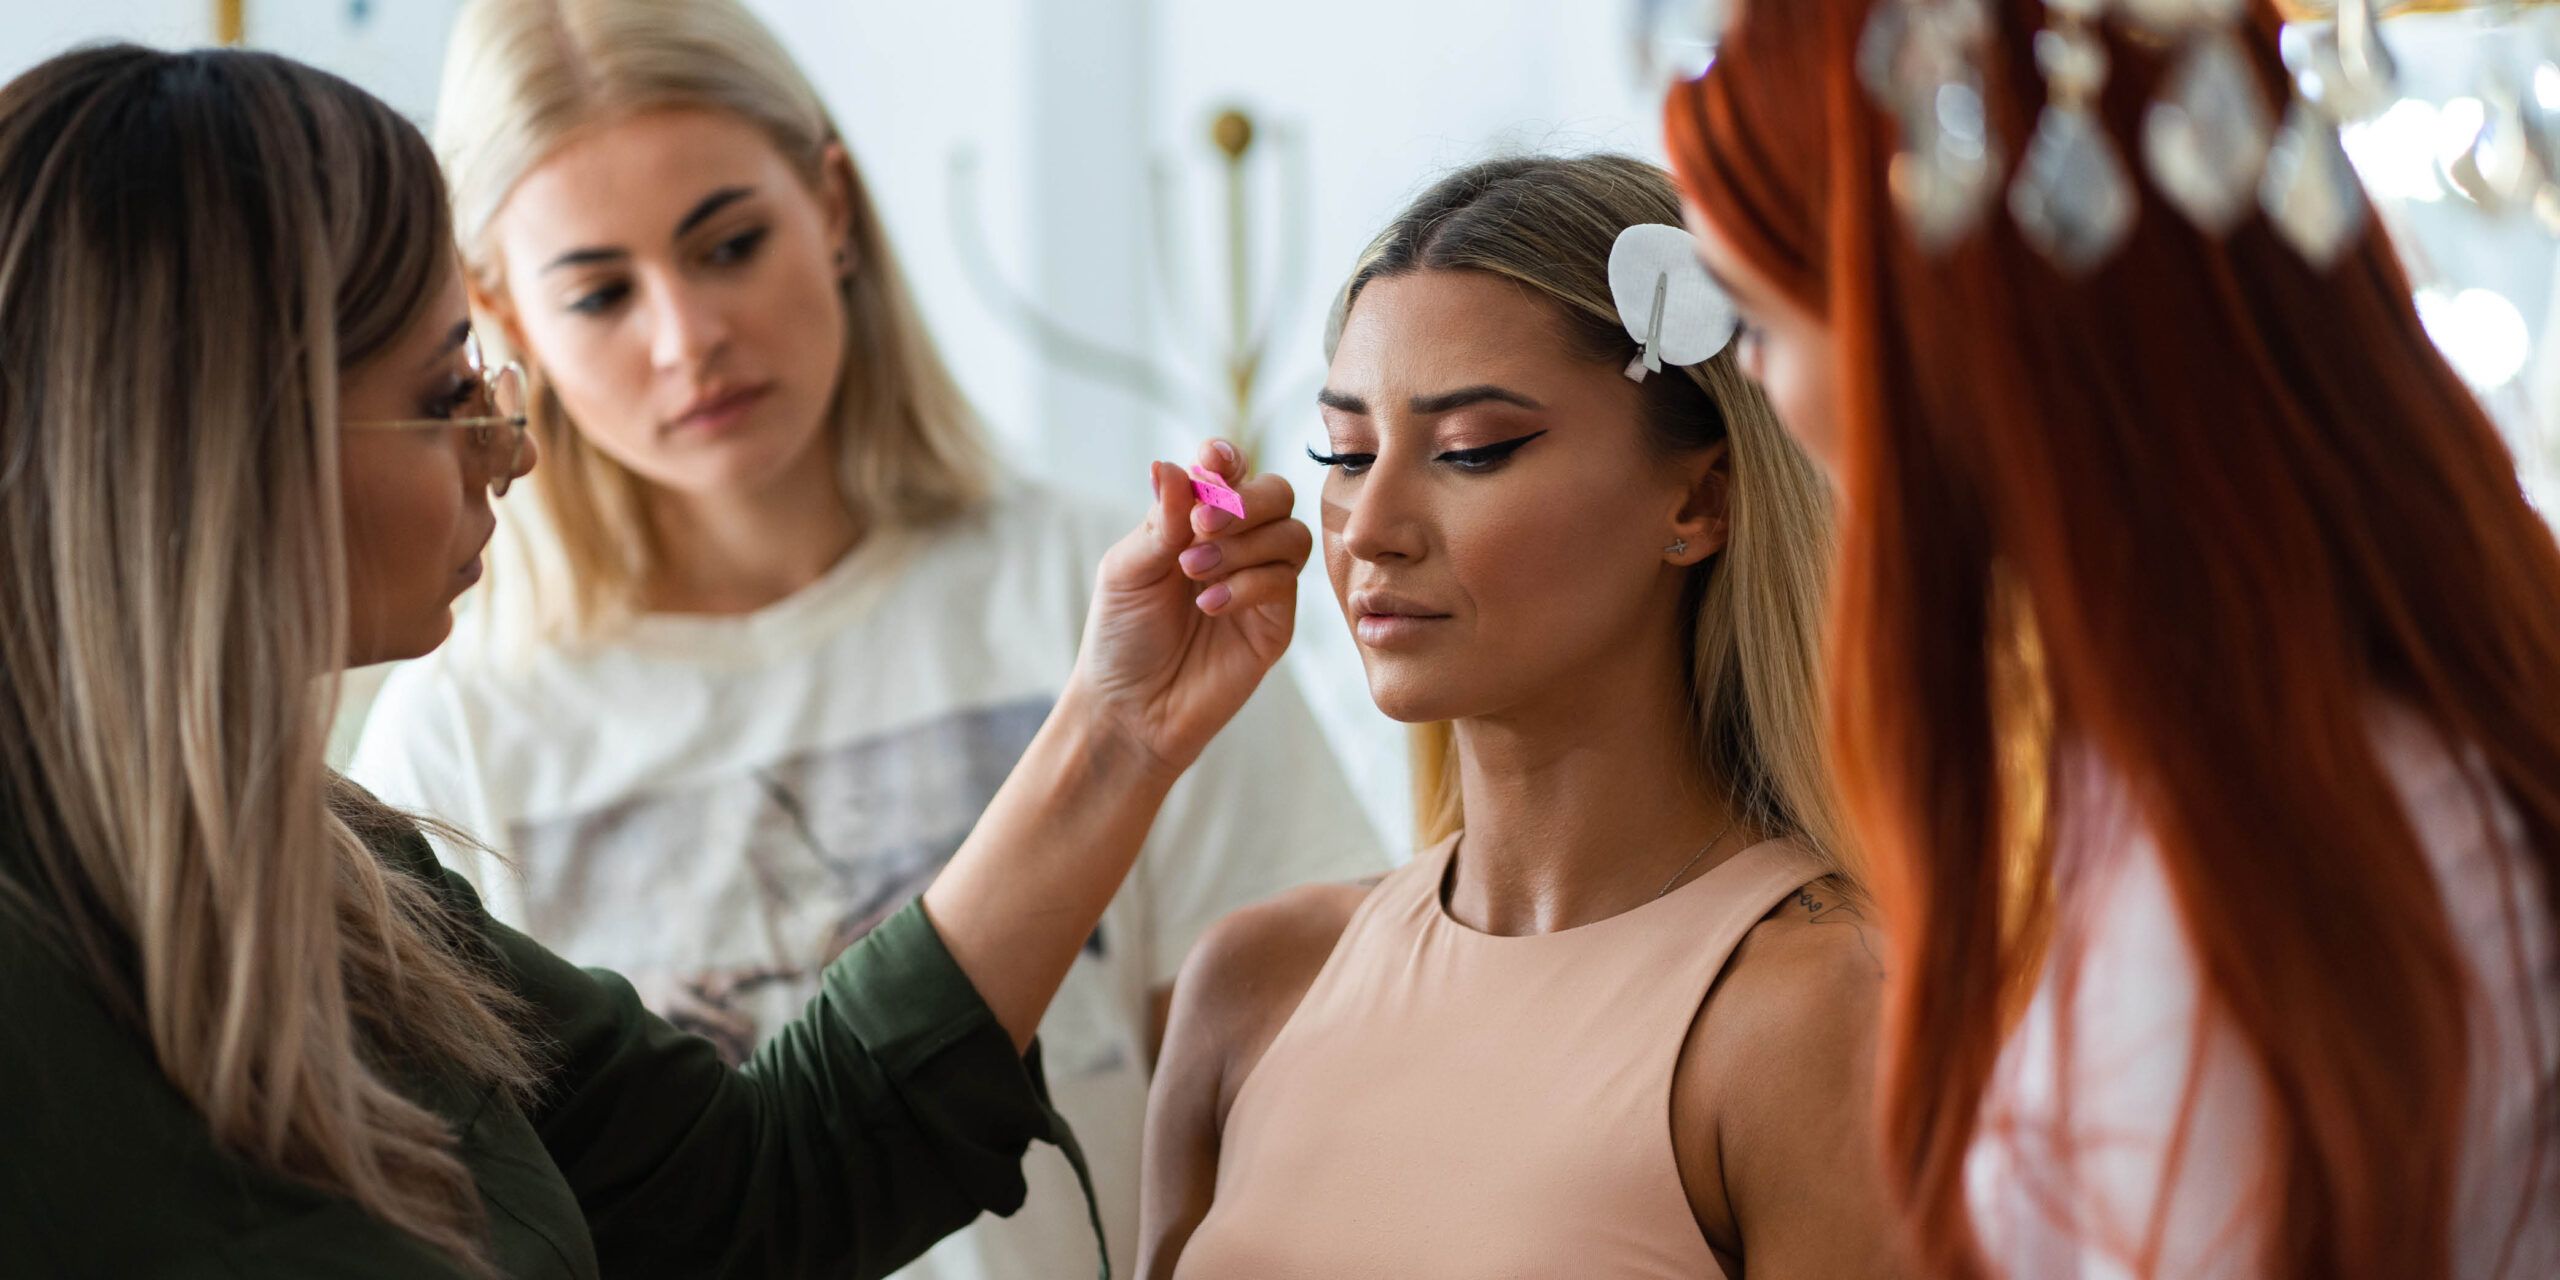 Meet the Hottest Makeup Artists in the Beauty Industry Right Now